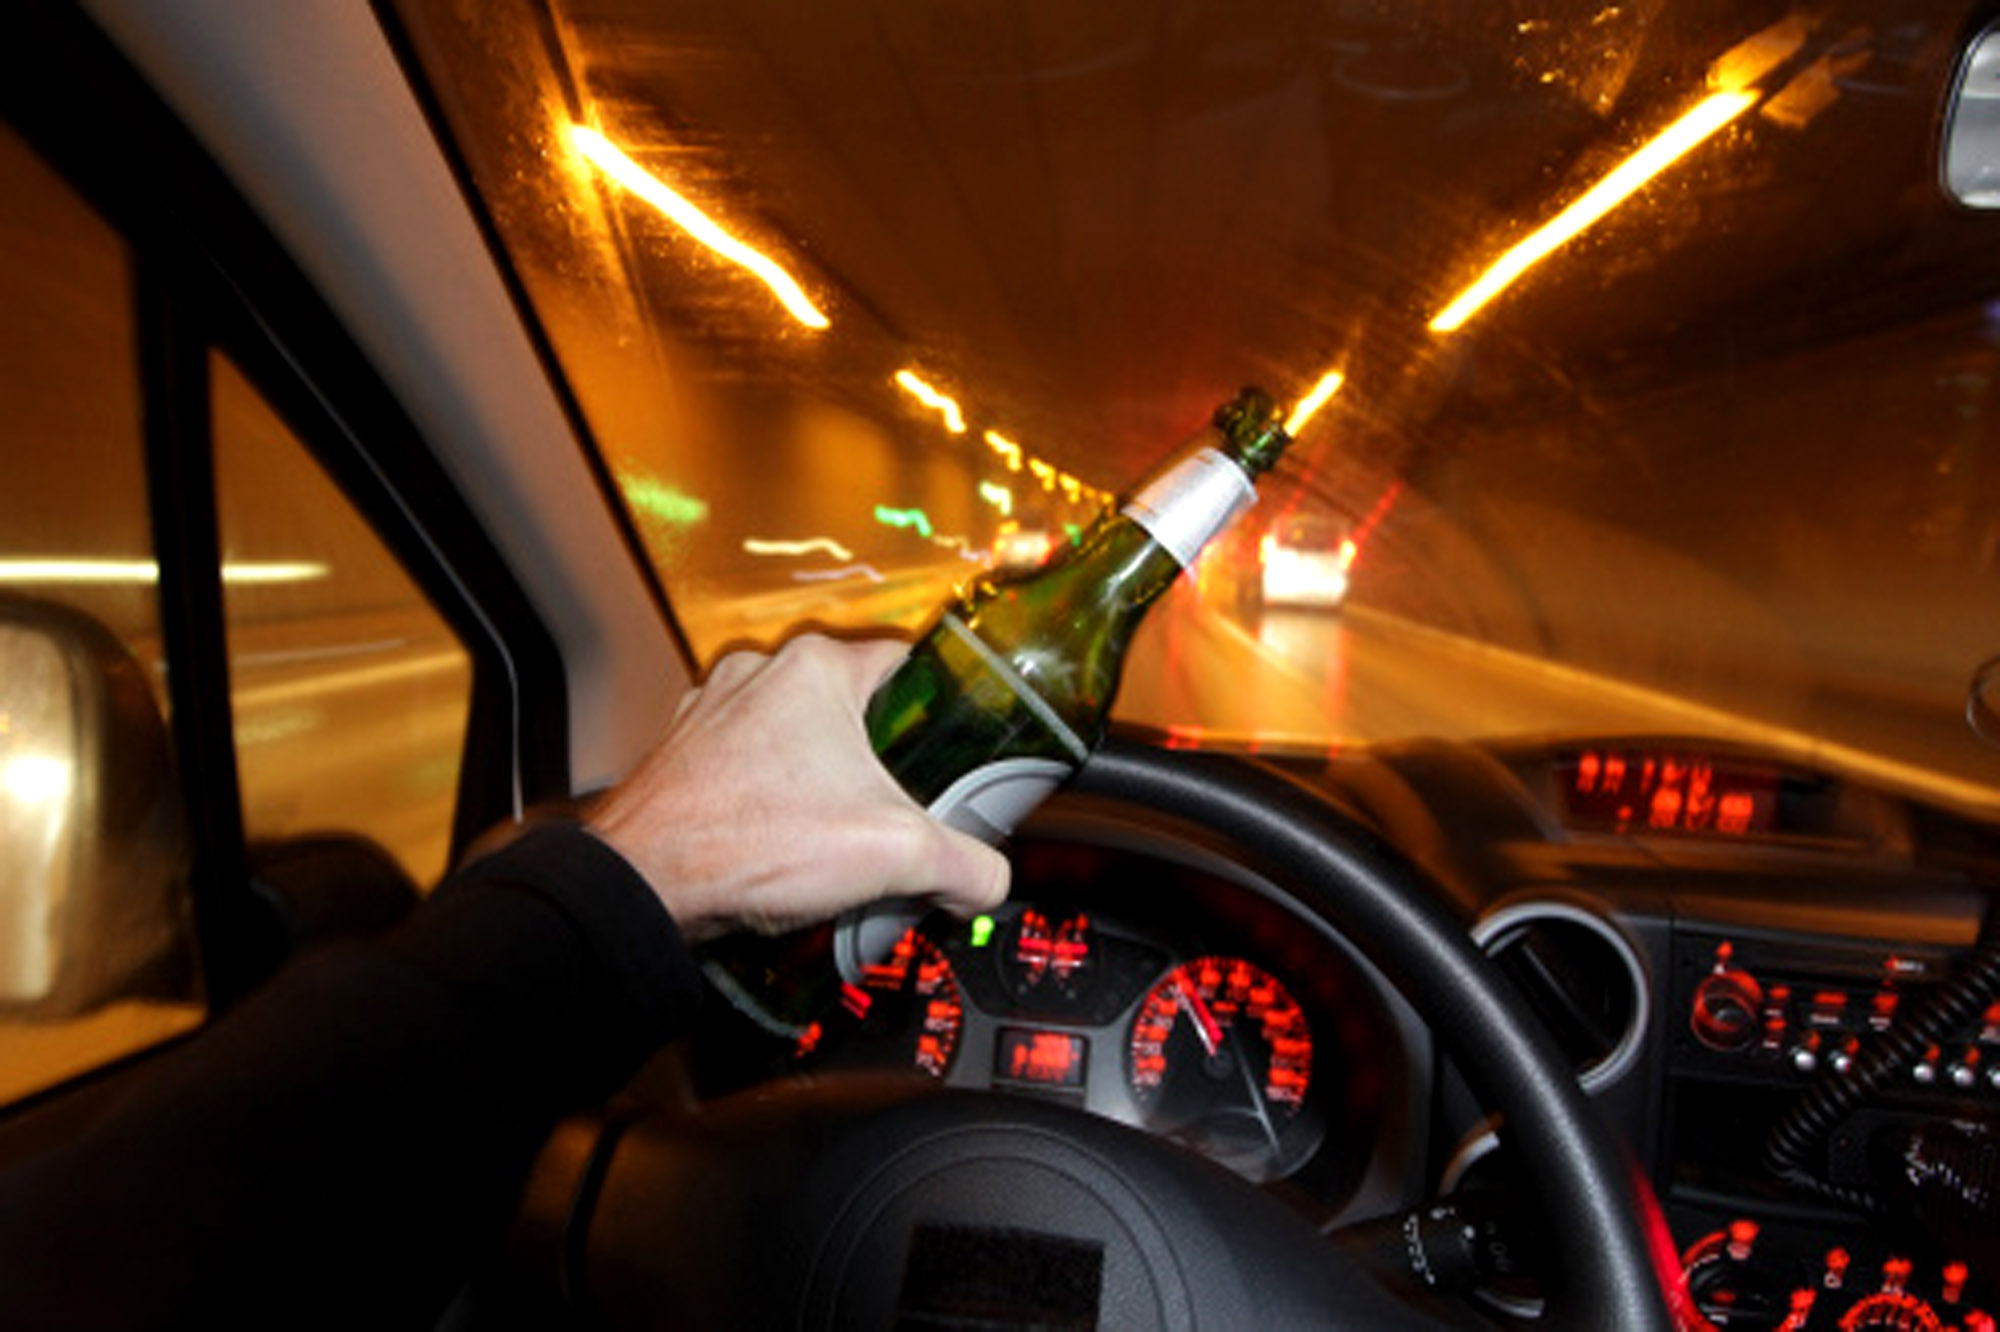 Consumer association calls for Malaysia to follow Swedish laws to prevent drunk driving